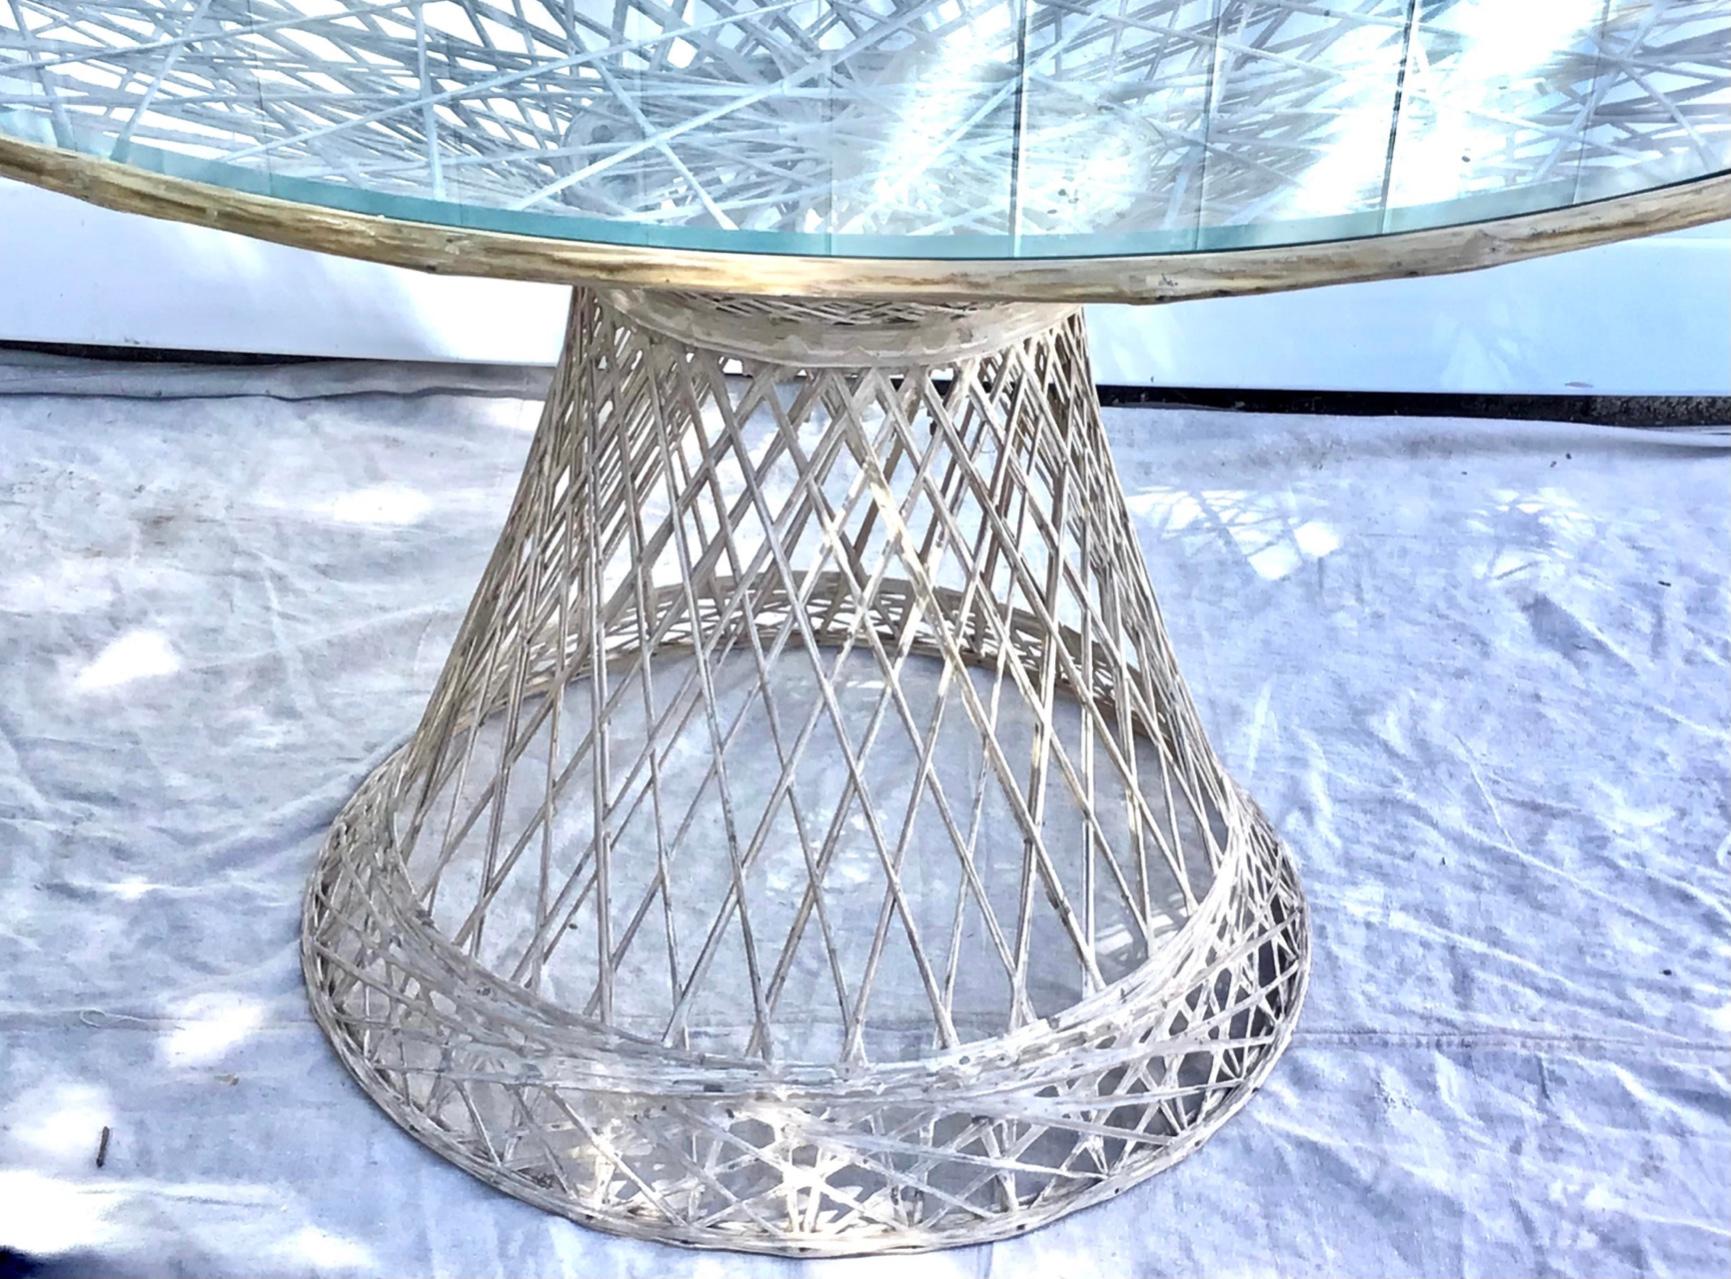 A sculptural spun fiberglass table by Russell Woodard. Made of rigid bands of off-white fiberglass. Would look great indoors or outdoors. Custom beveled glass top included.